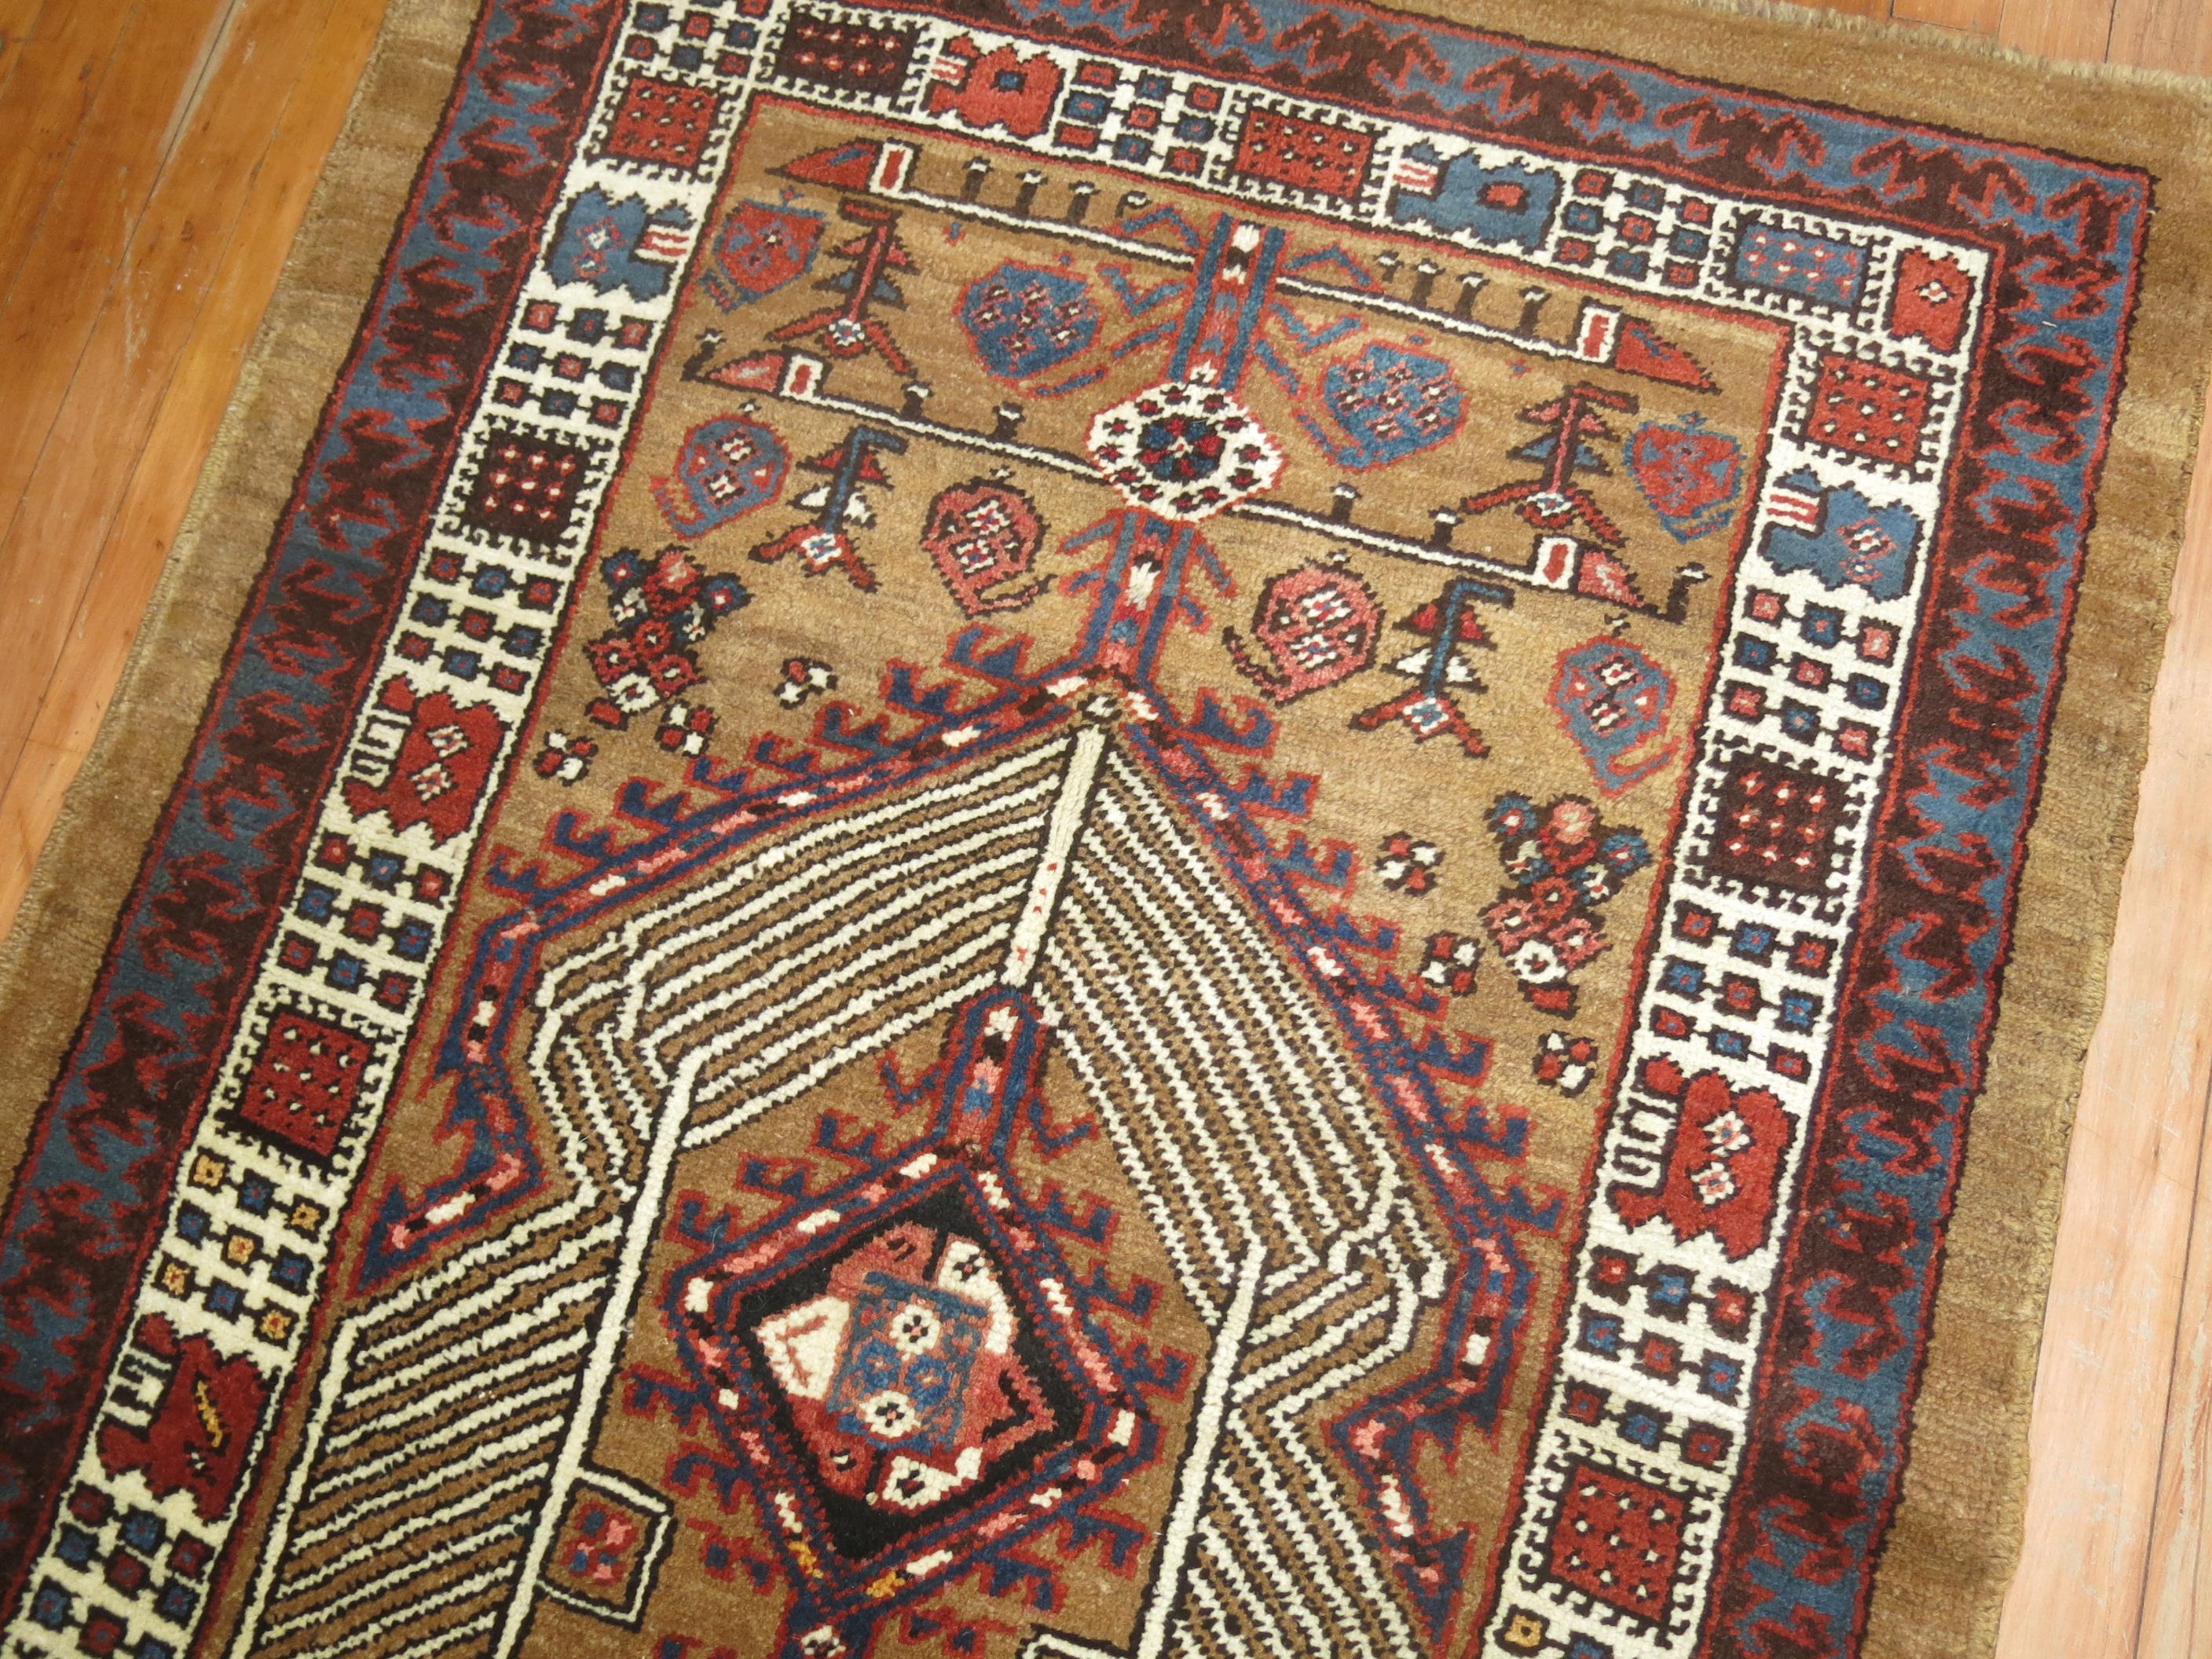 An early 20th century tribal Persian Serab runner with a geometric rustic color motif on a camel colored ground. Very versatile and sturdy. Dont be hesitant to use it in a high traffic area.

Measures: 3'4'' x 7'10''.